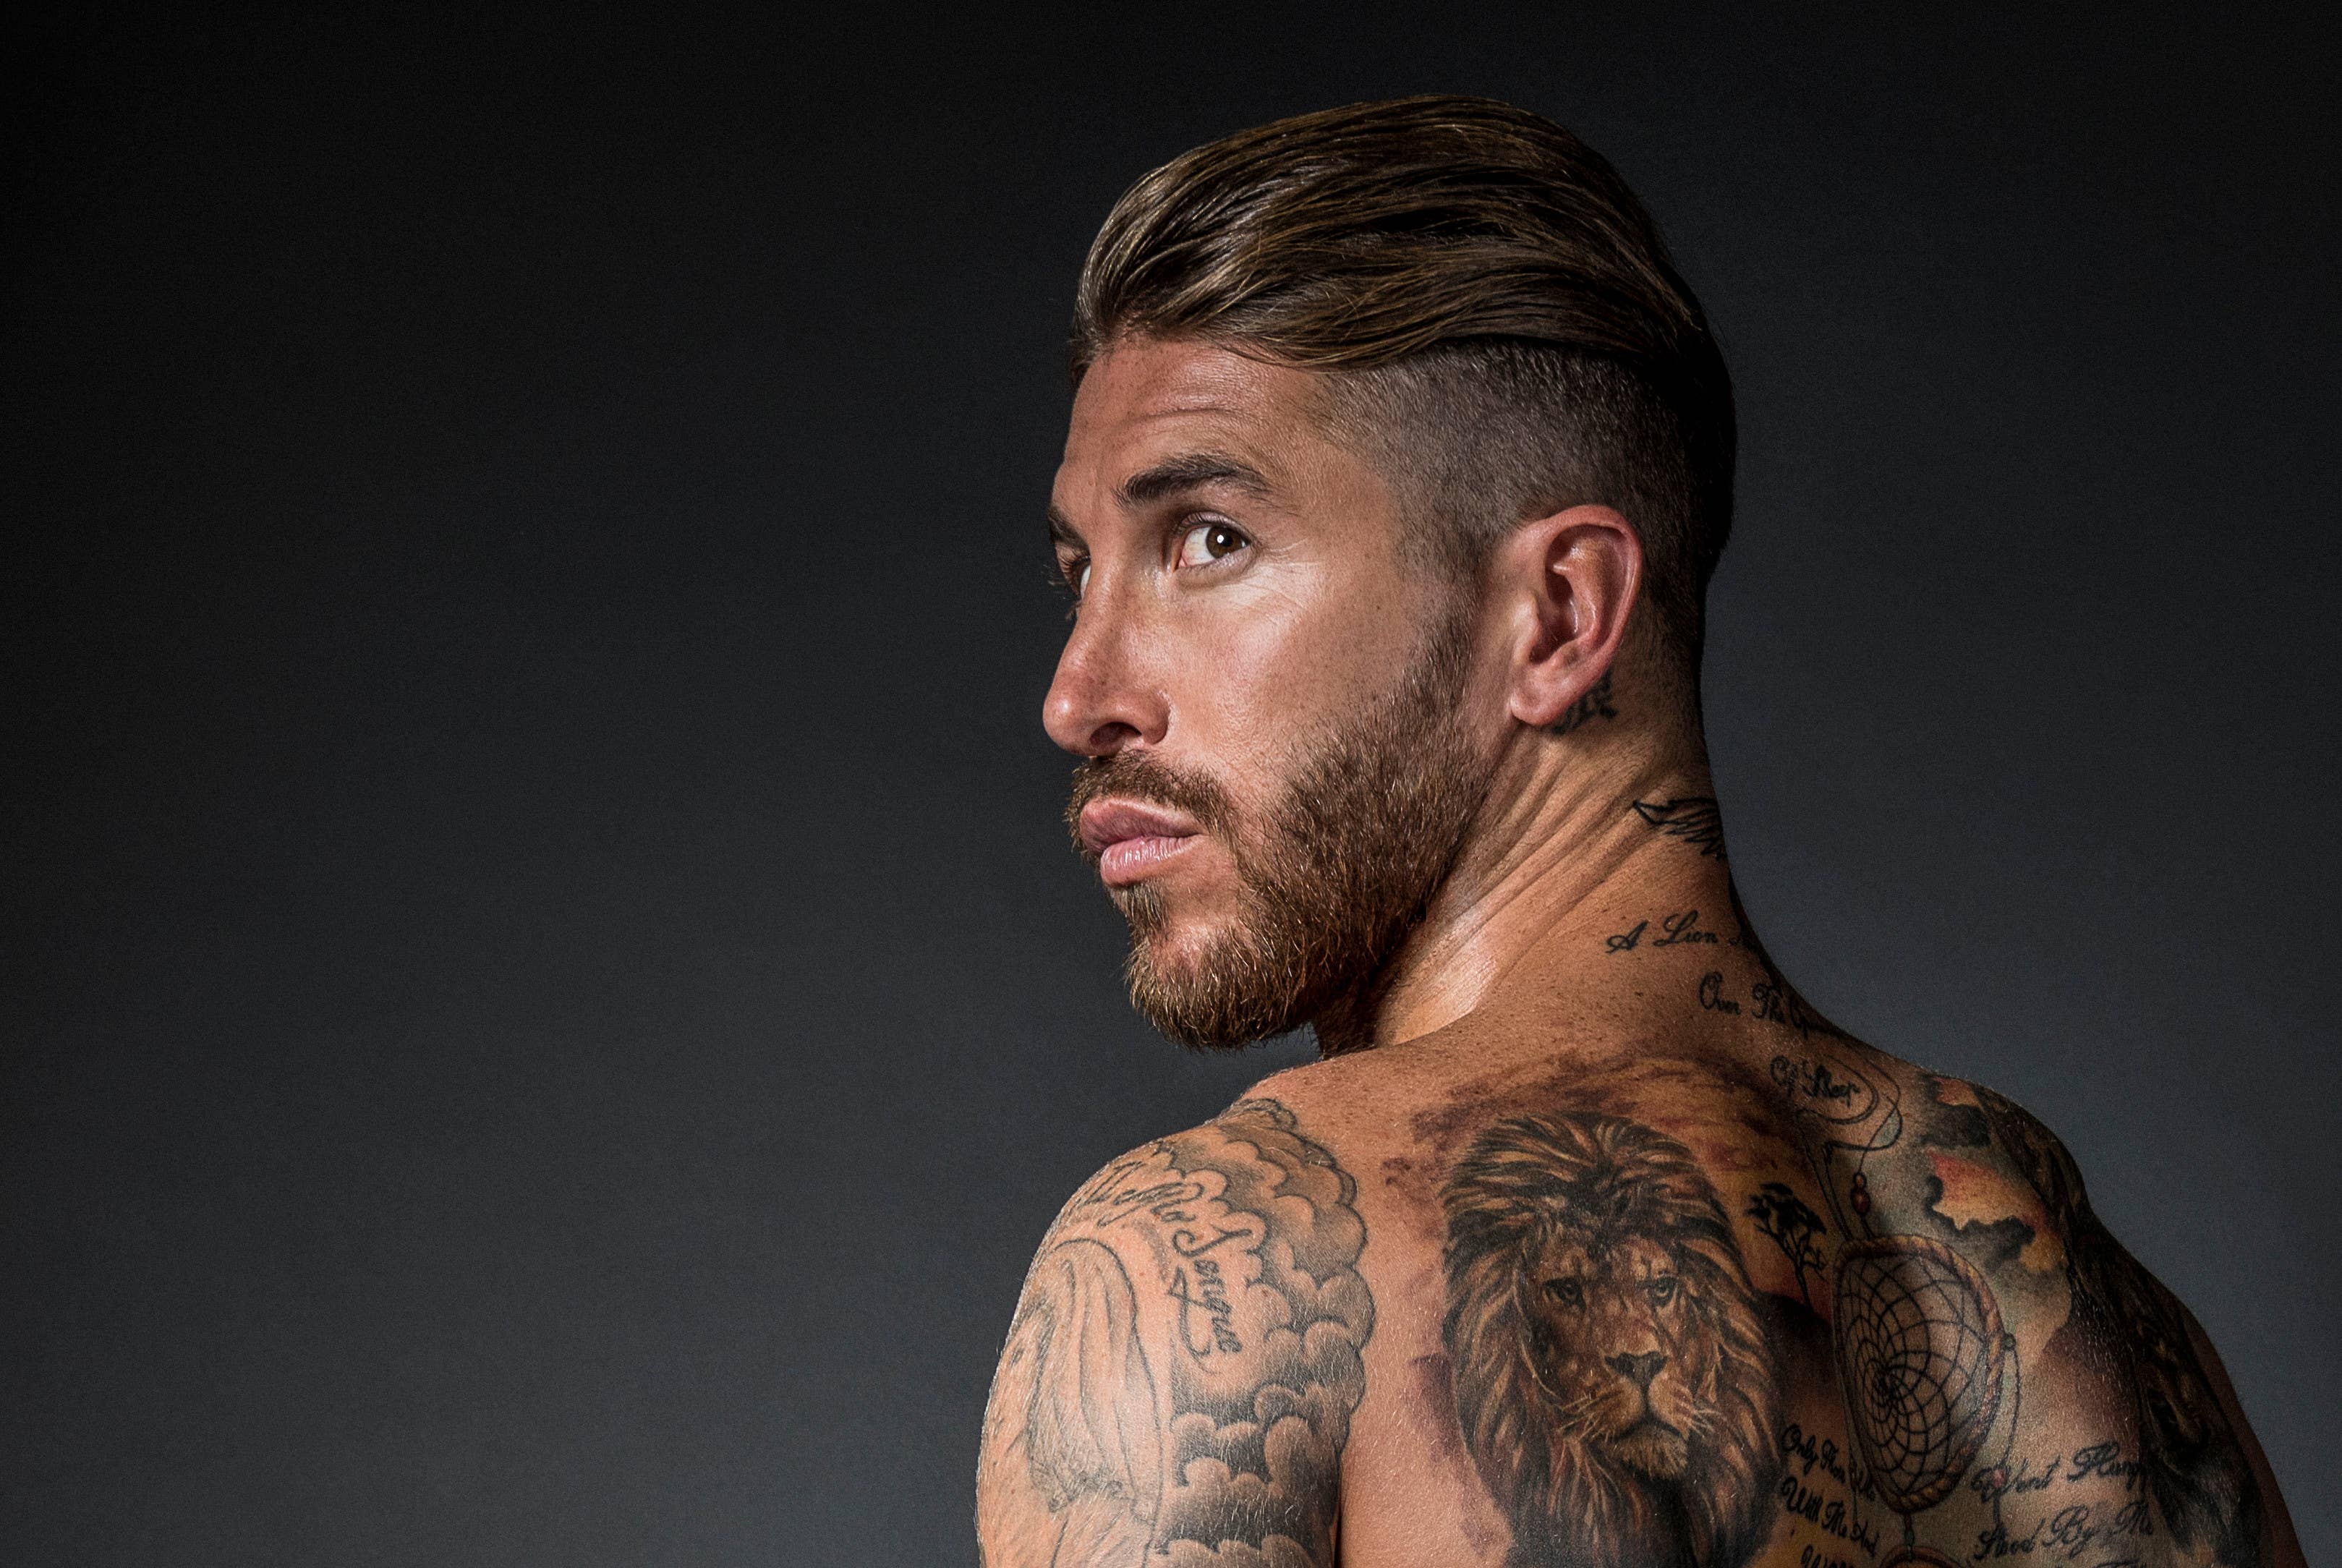 Interview: Sergio Ramos on Real Madrid, Pre-Match Playlists and